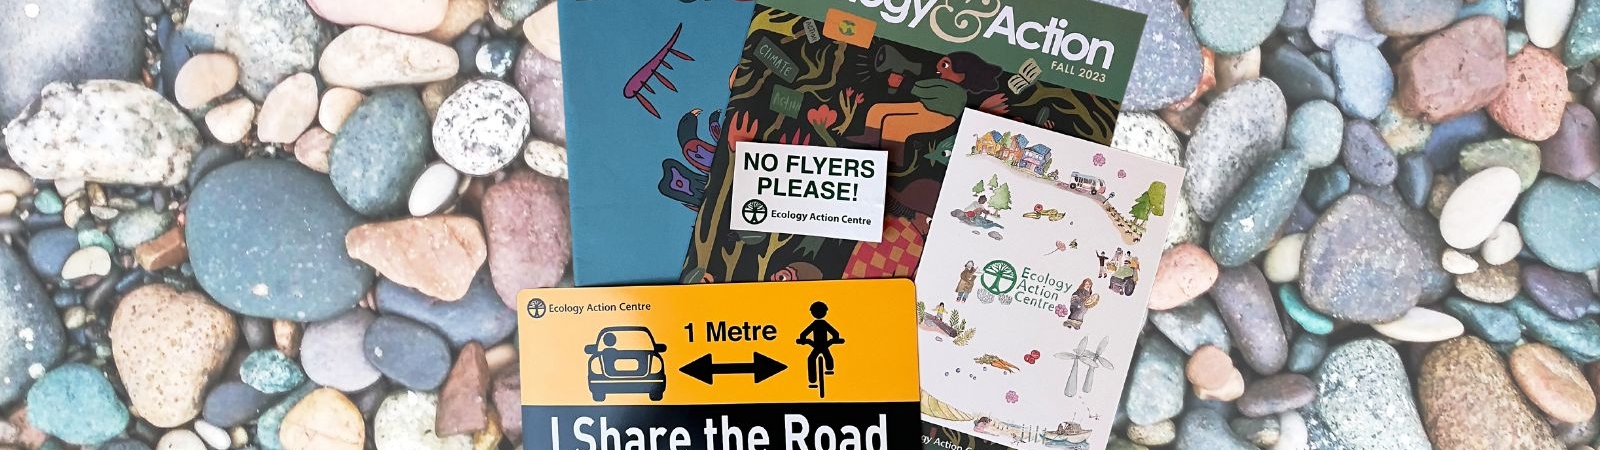 Contents of a gift membership on a backdrop of sea pebbles: two Ecology & Action magazines, a No Flyers Please sticker, an I Share the Road car magnet and an EAC card